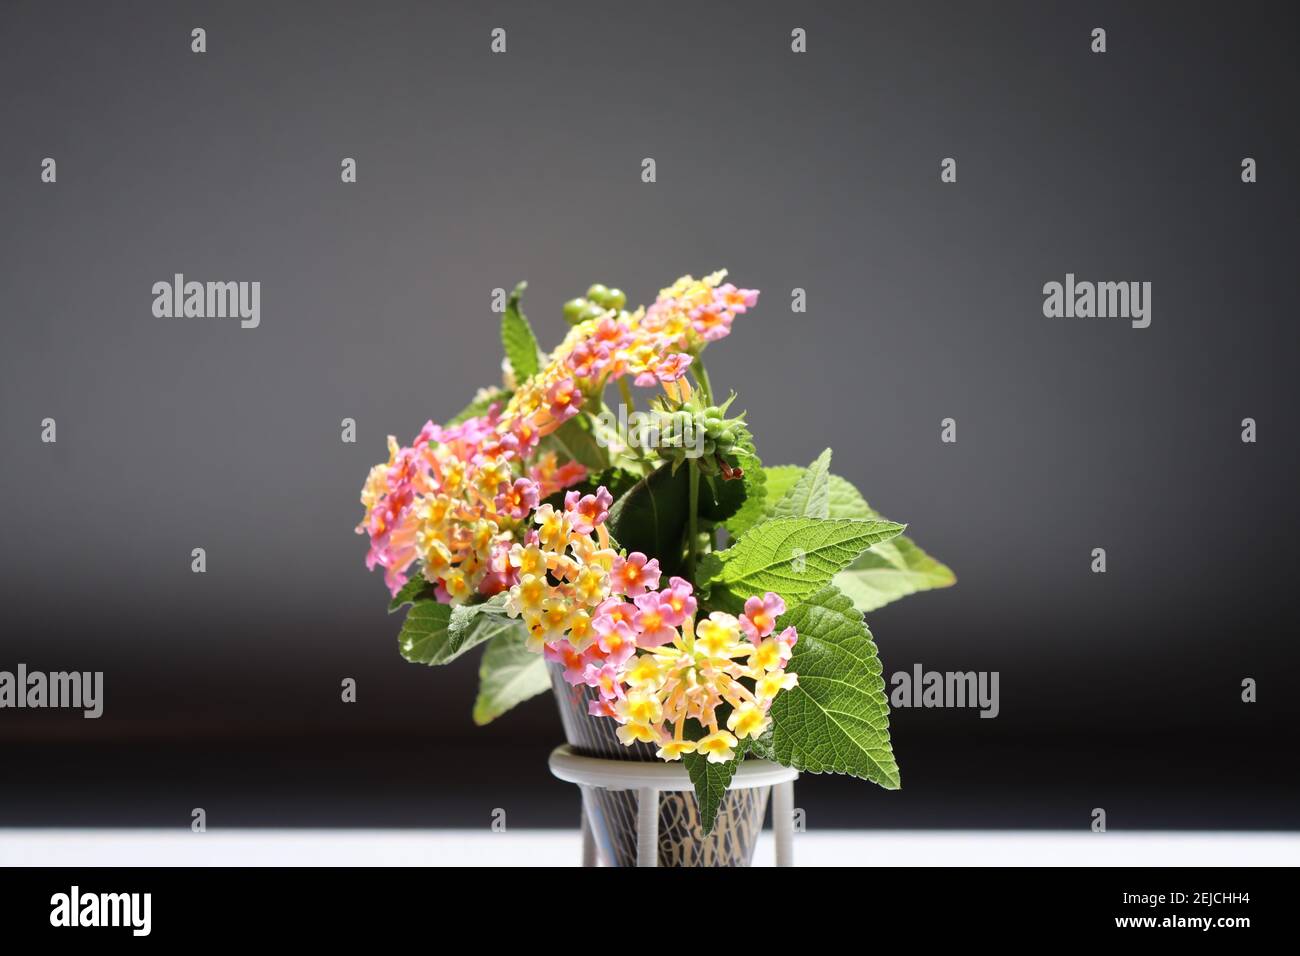 Lantana beautiful tiny flowers in the 'Happy Brithday' cone on the Pizza spacer with the nice backgrounds. Stock Photo